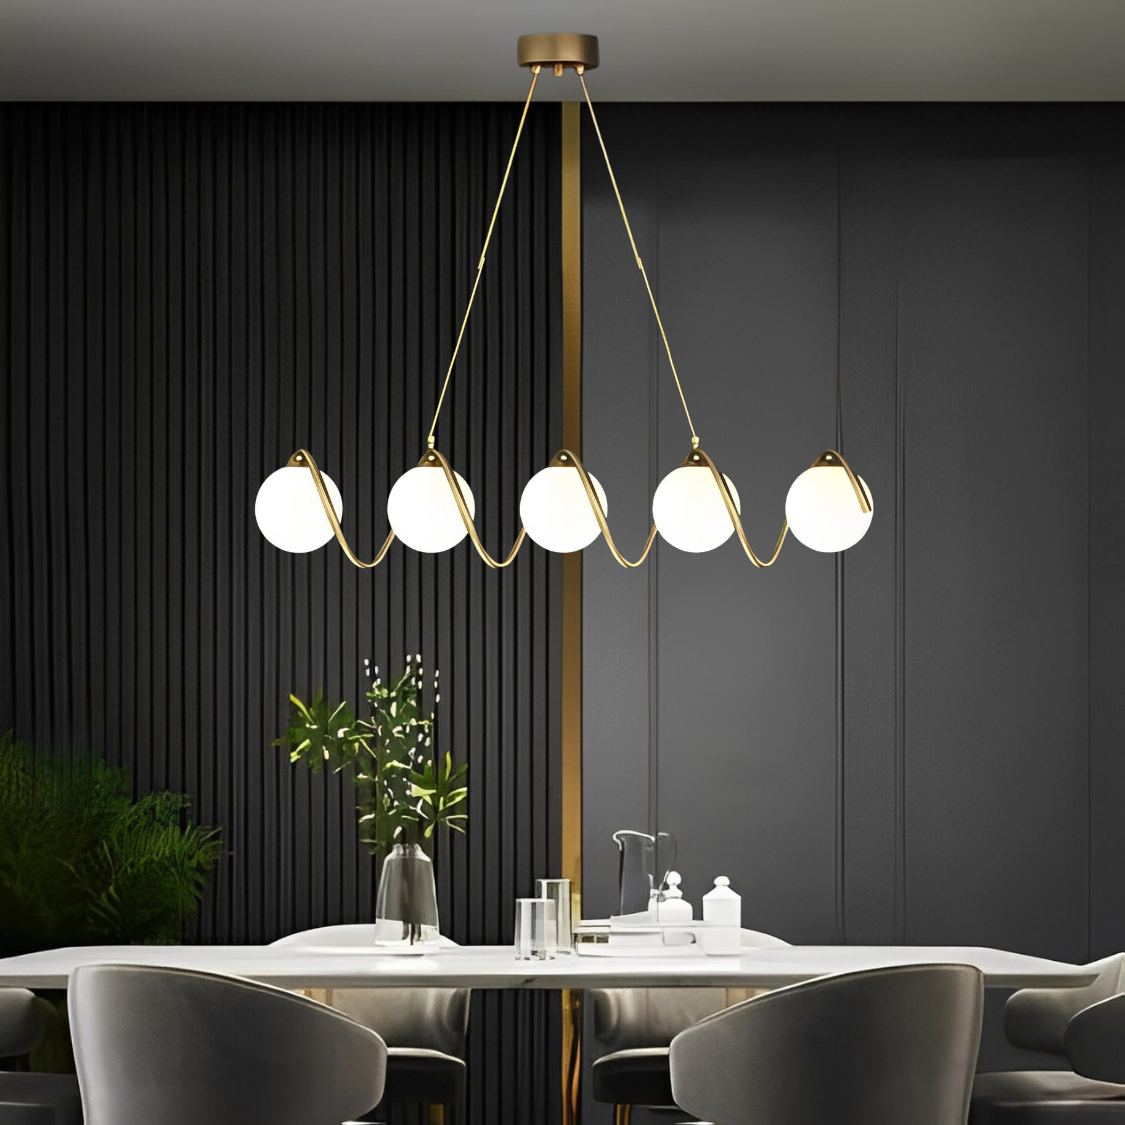 Nordic Metal Chandelier by Gloss (0973/5)